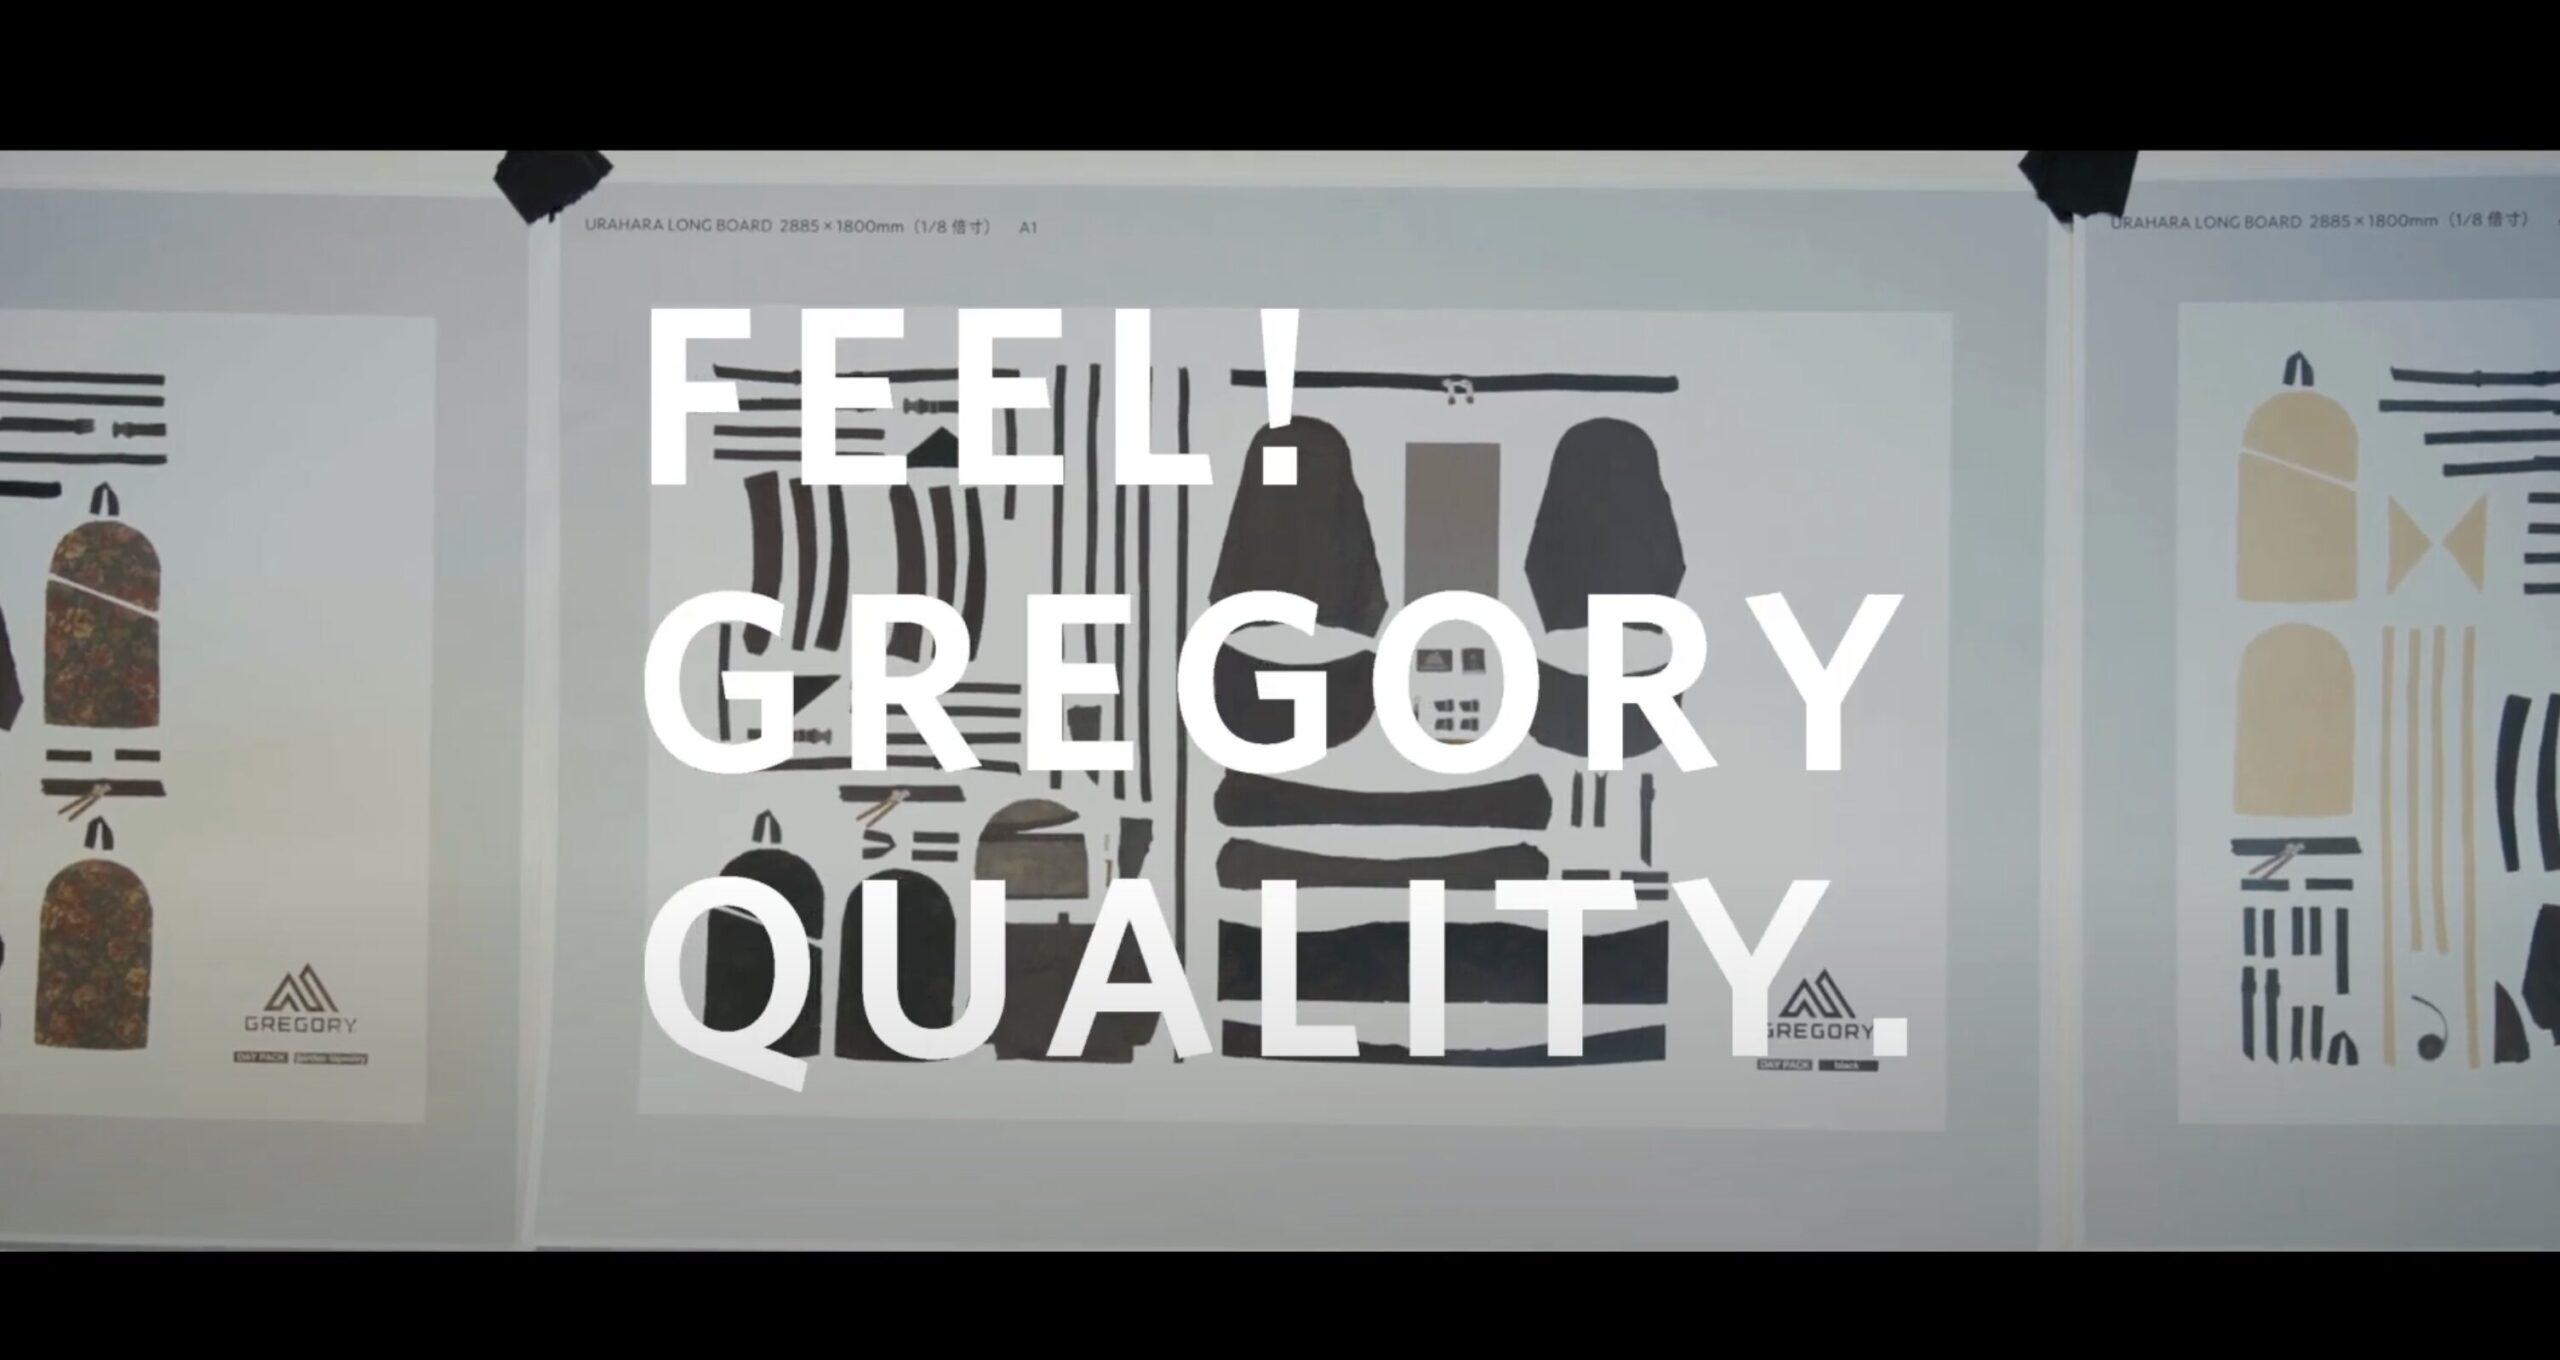 FEEL! GREGORY QUALITY